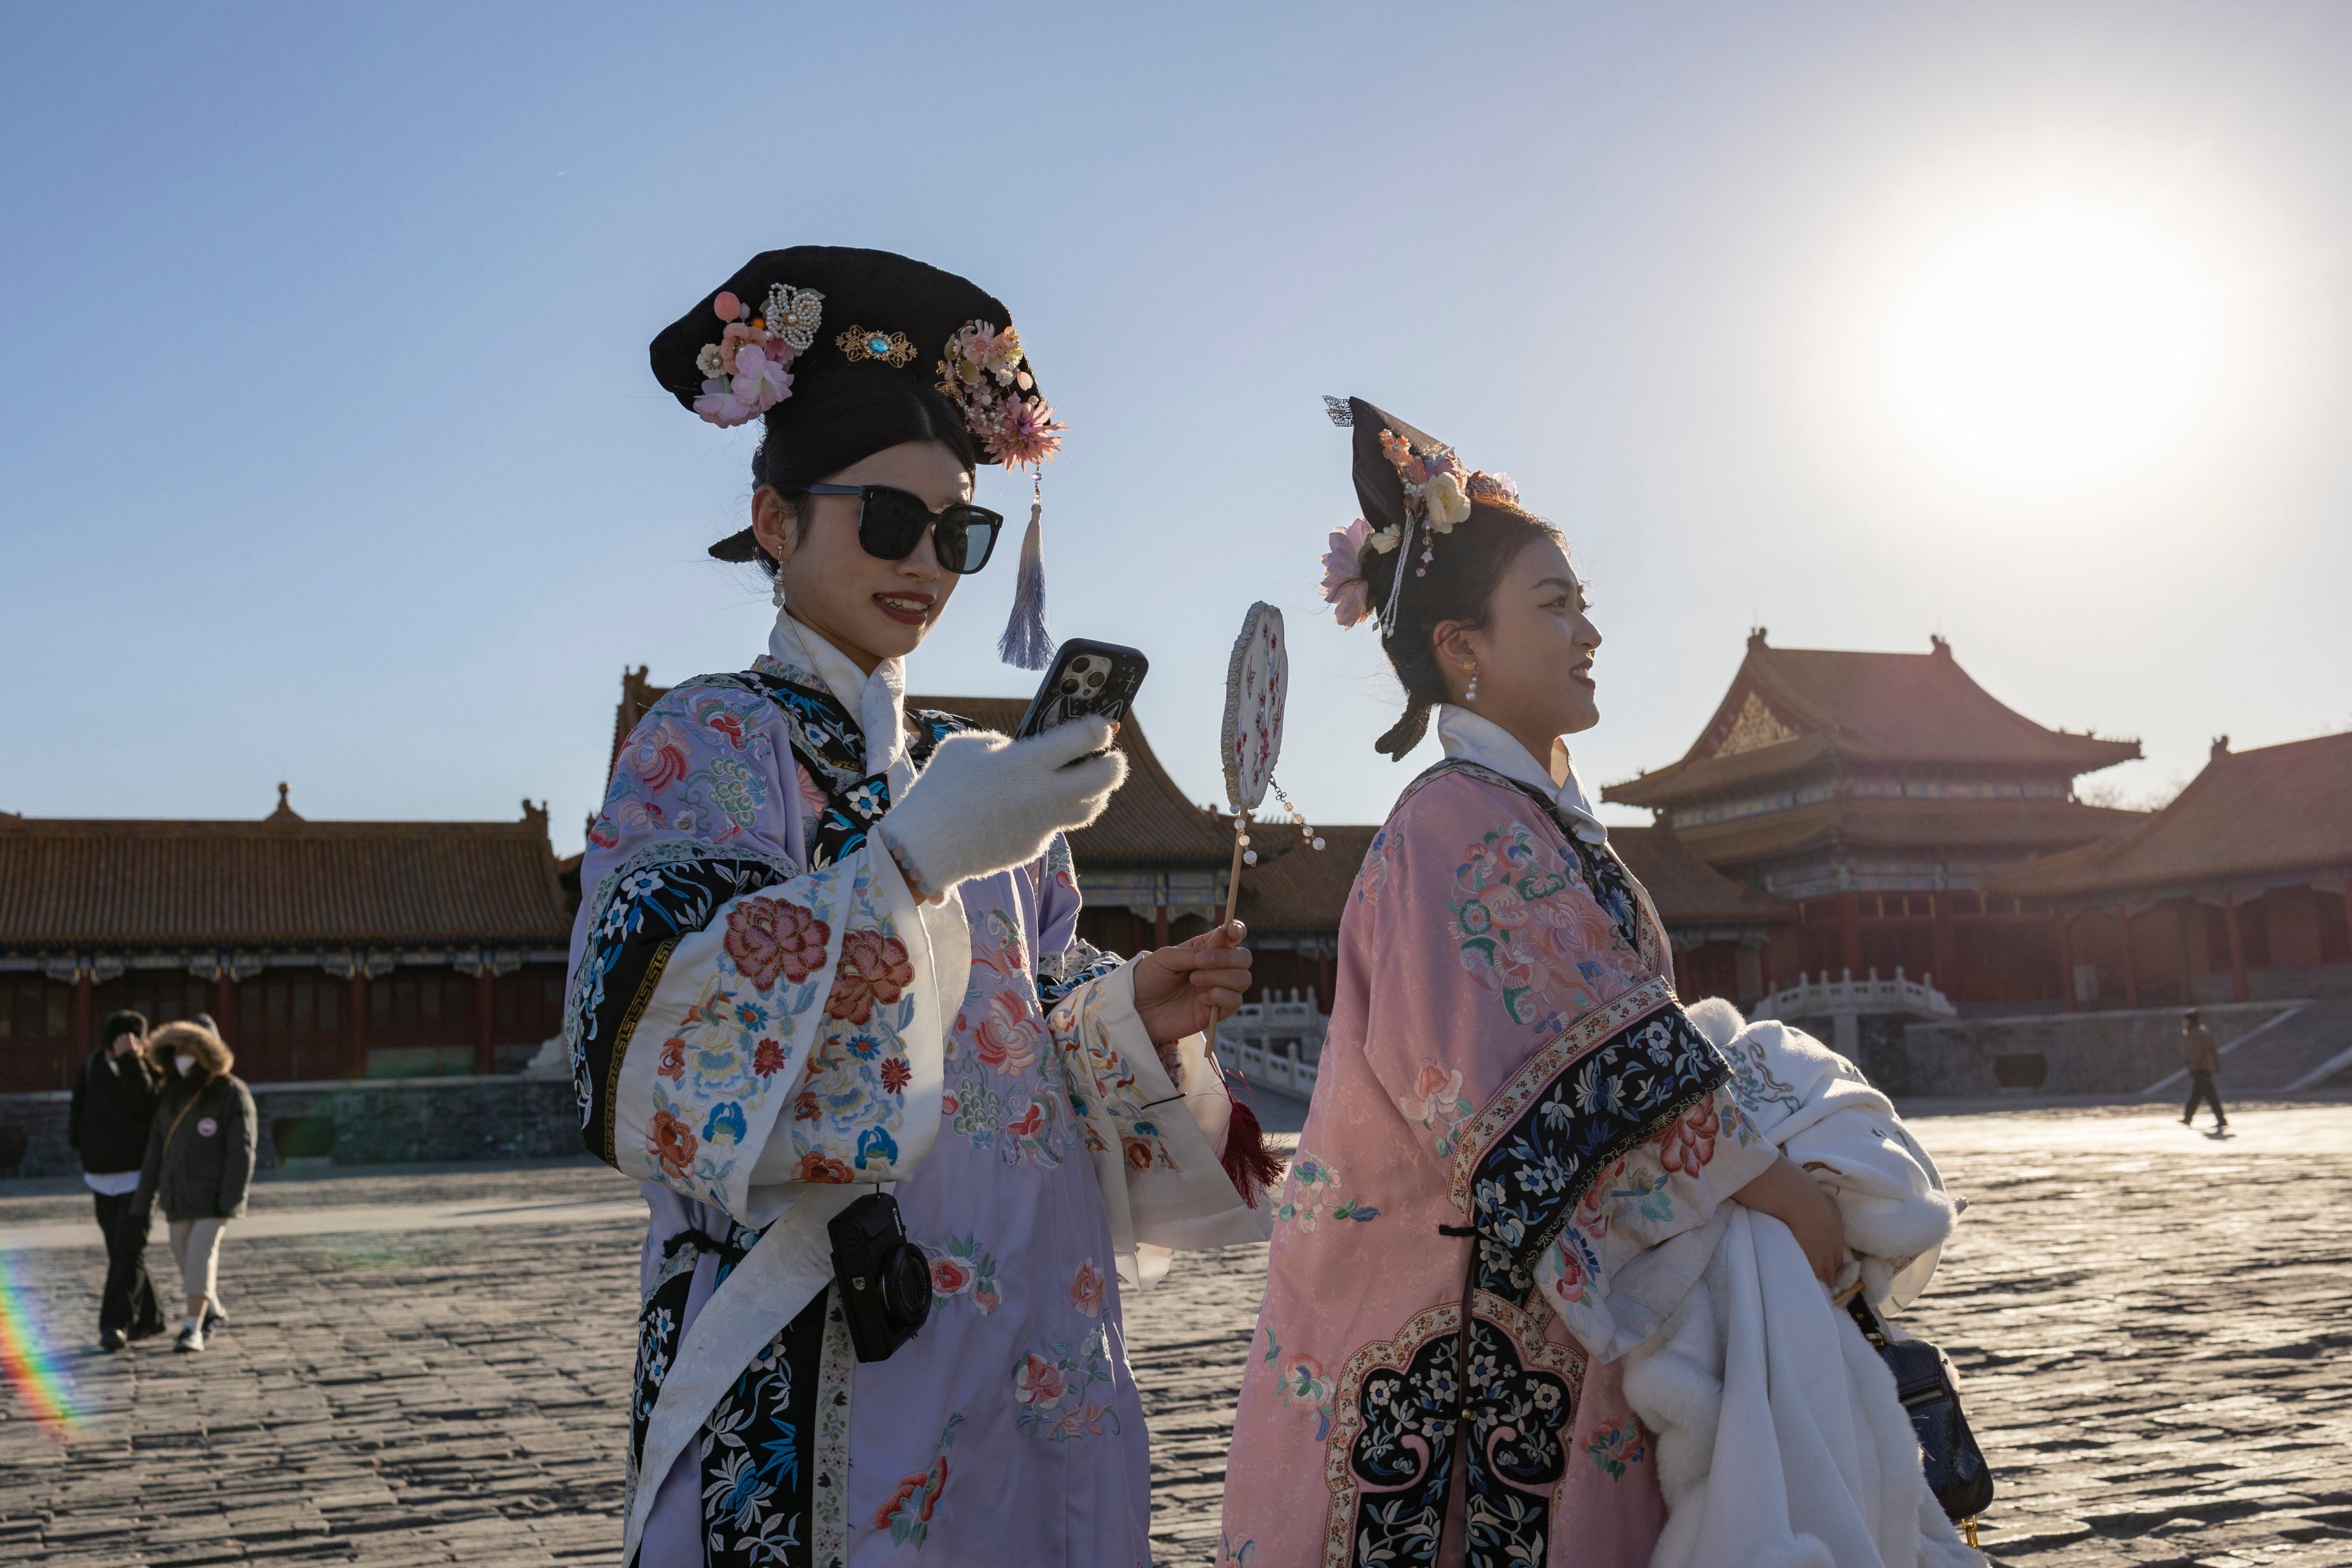 Domestic travel has fuelled a tourism recovery in China that has surpassed expectations and returned revenues to their pre-pandemic levels. Photo: Xinhua